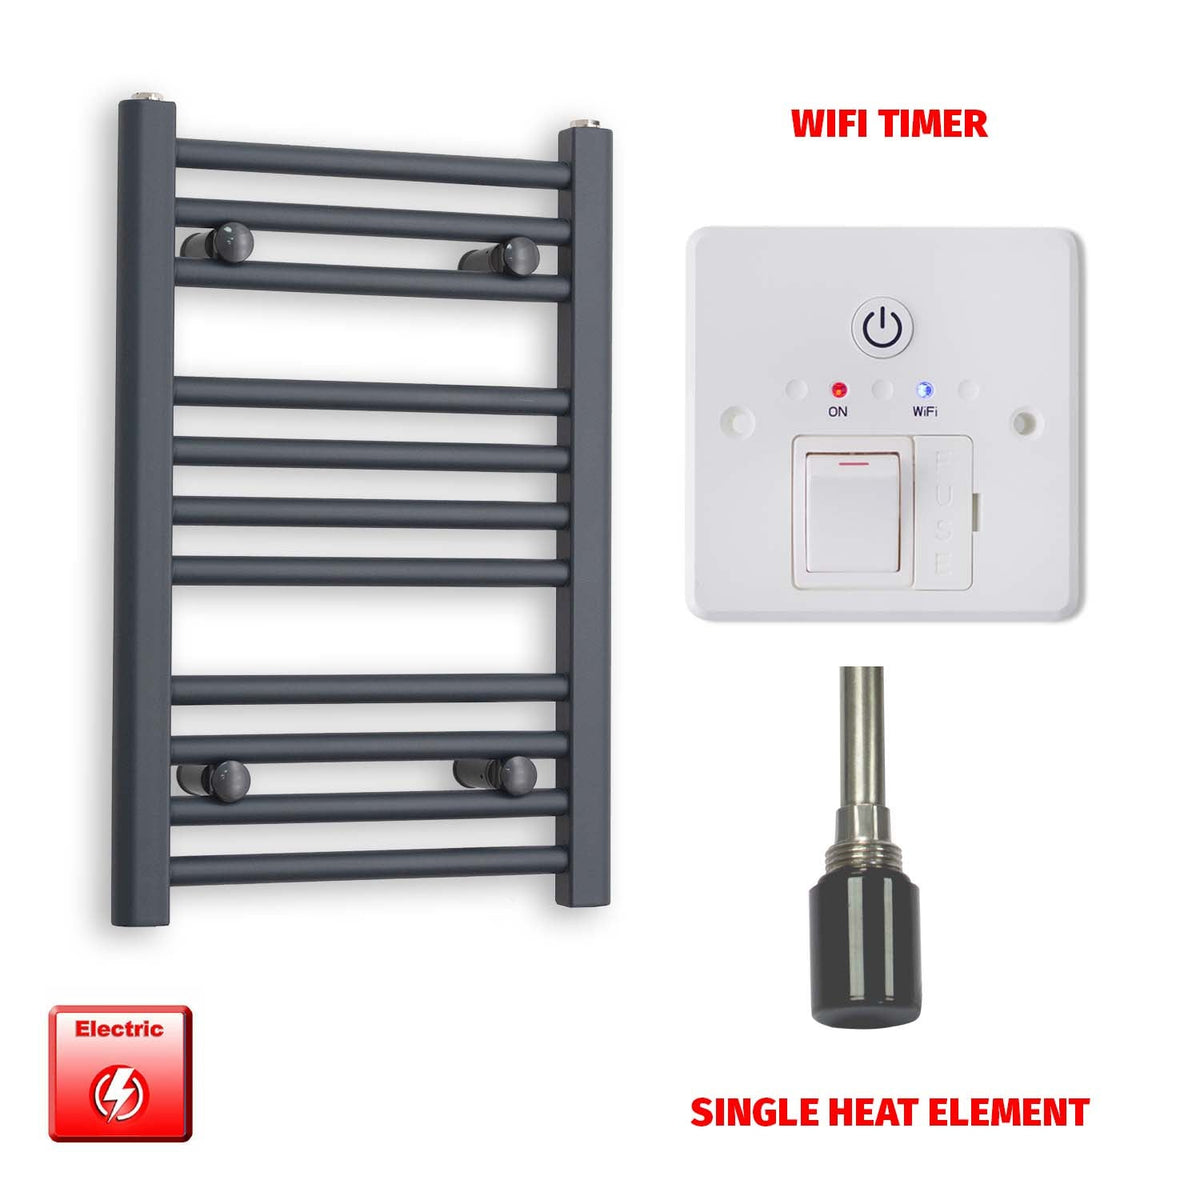 600mm High 400mm Wide Flat Anthracite Pre-Filled Electric Heated Towel Rail Radiator HTR Single heat element Wifi timer